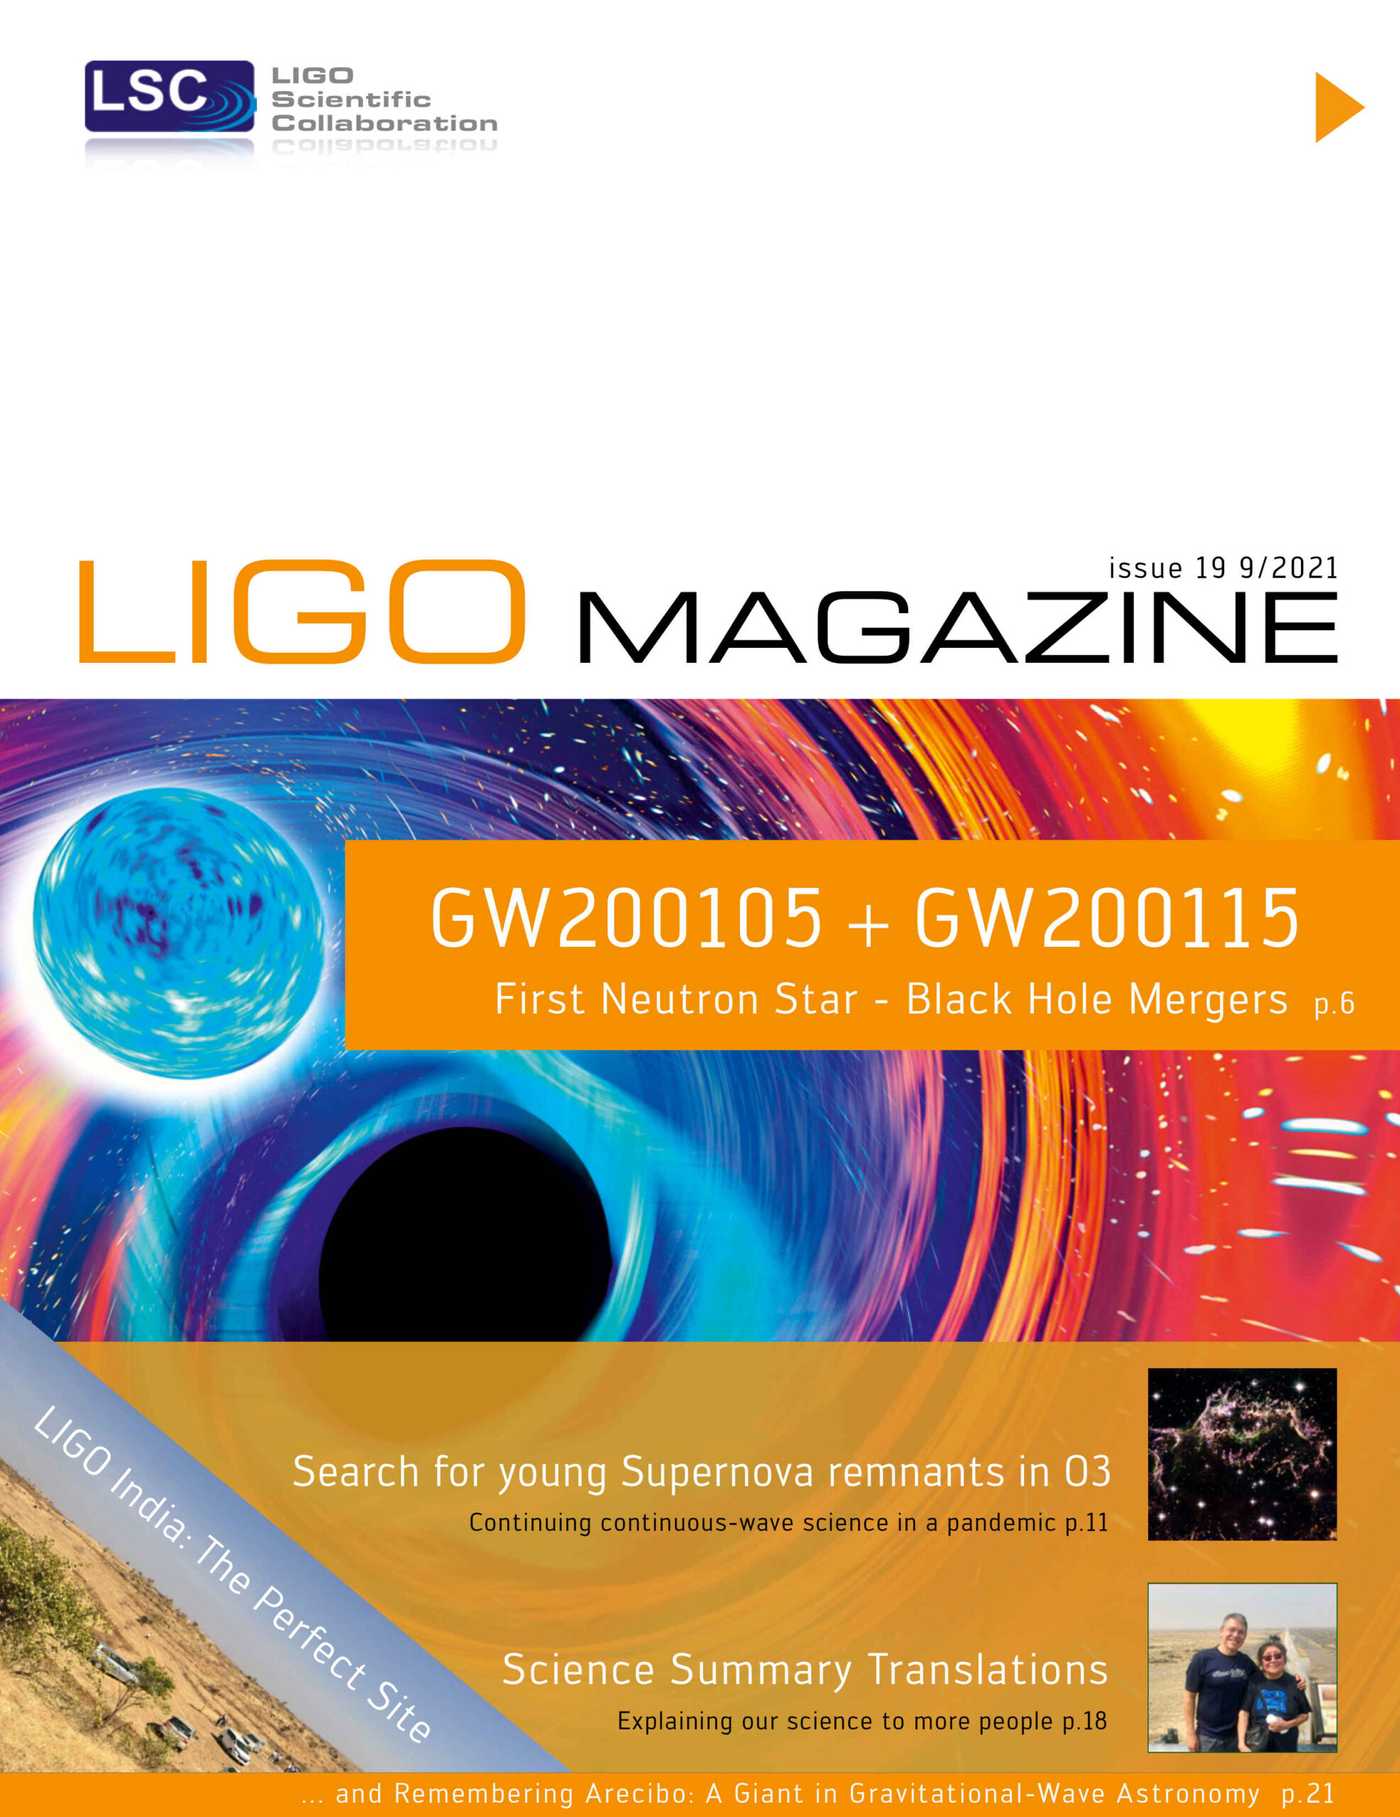 News-Image 28 of: New LIGO Magazine Issue 19 is out